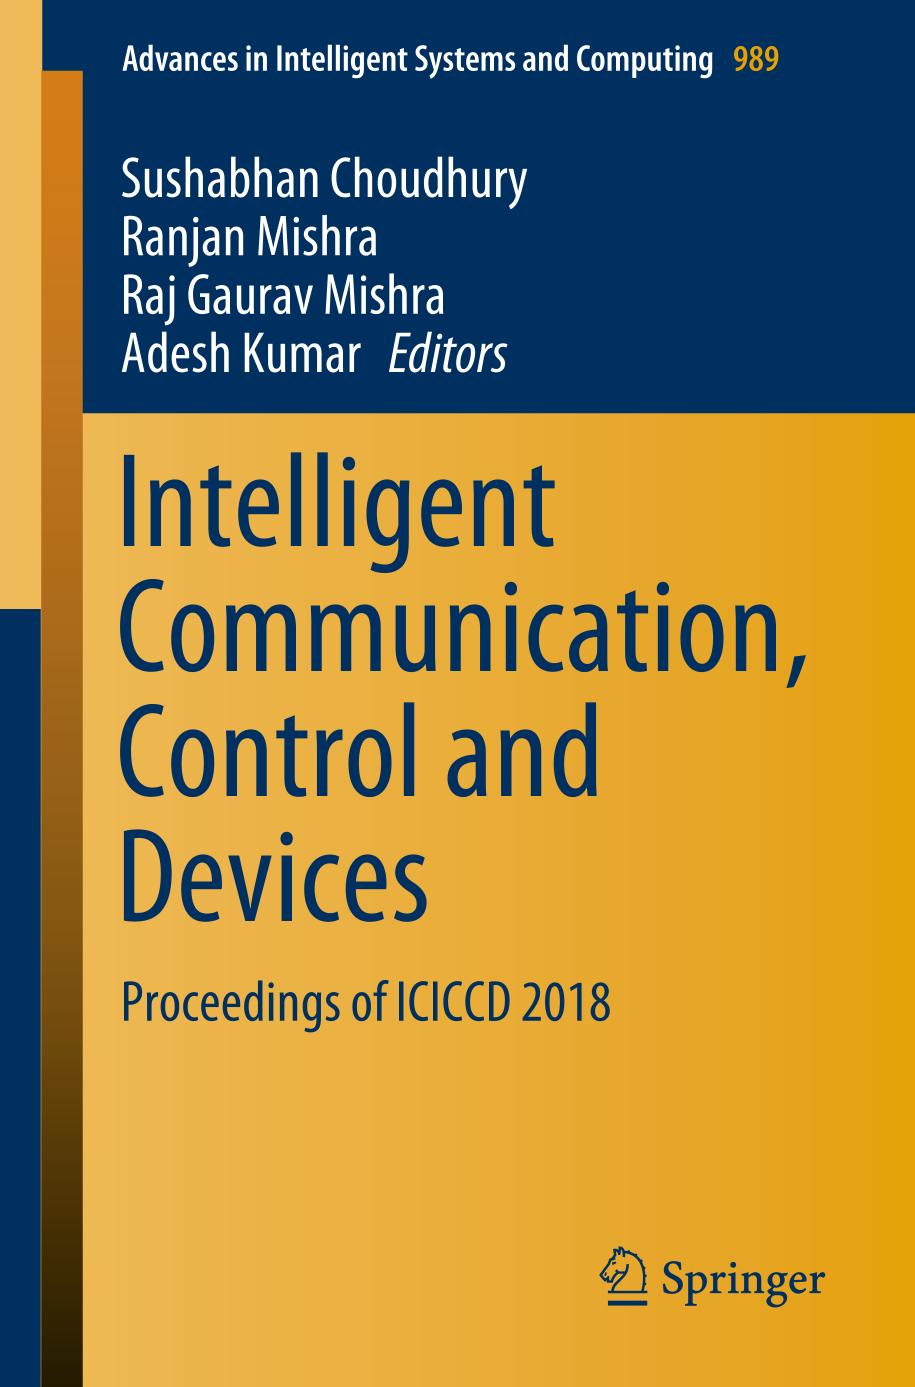 Intelligent Communication, Control and Devices : Proceedings of ICICCD 2018